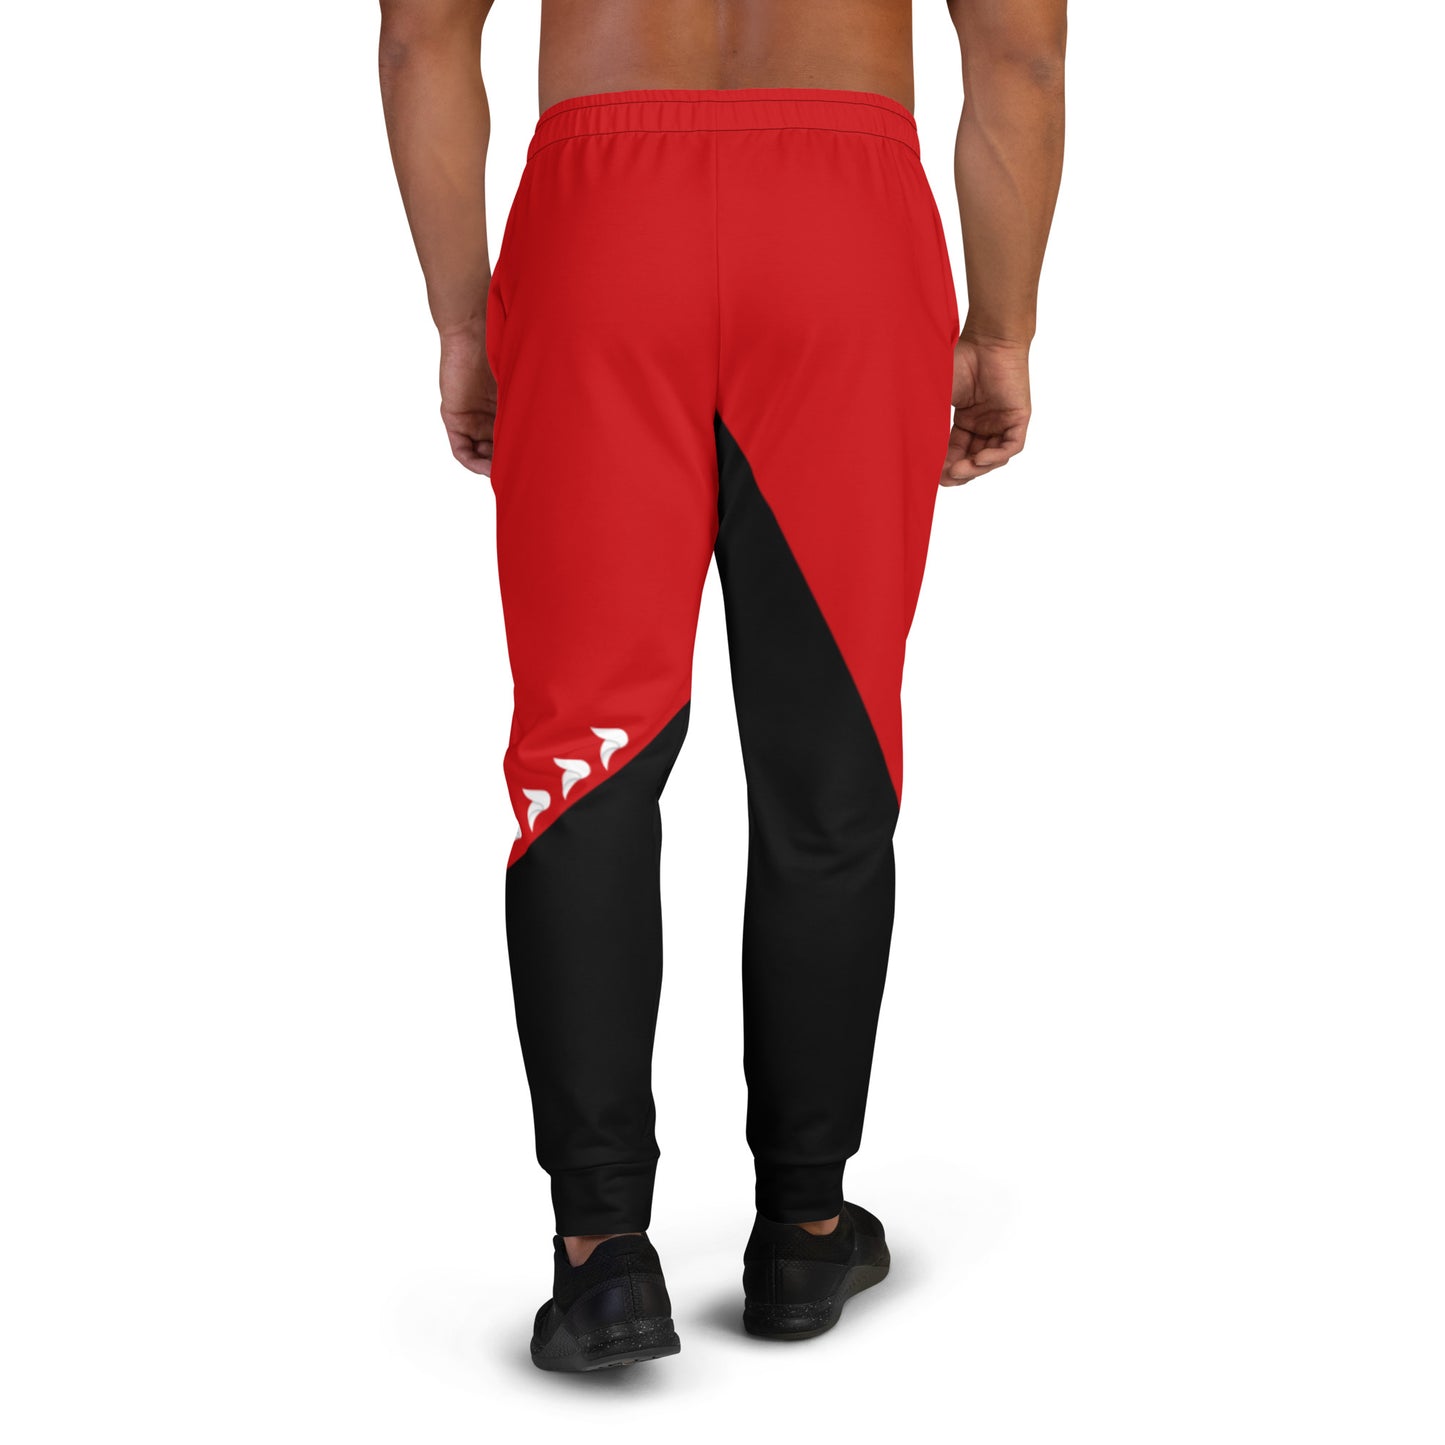 PLY - Joggers Red & Black - Men